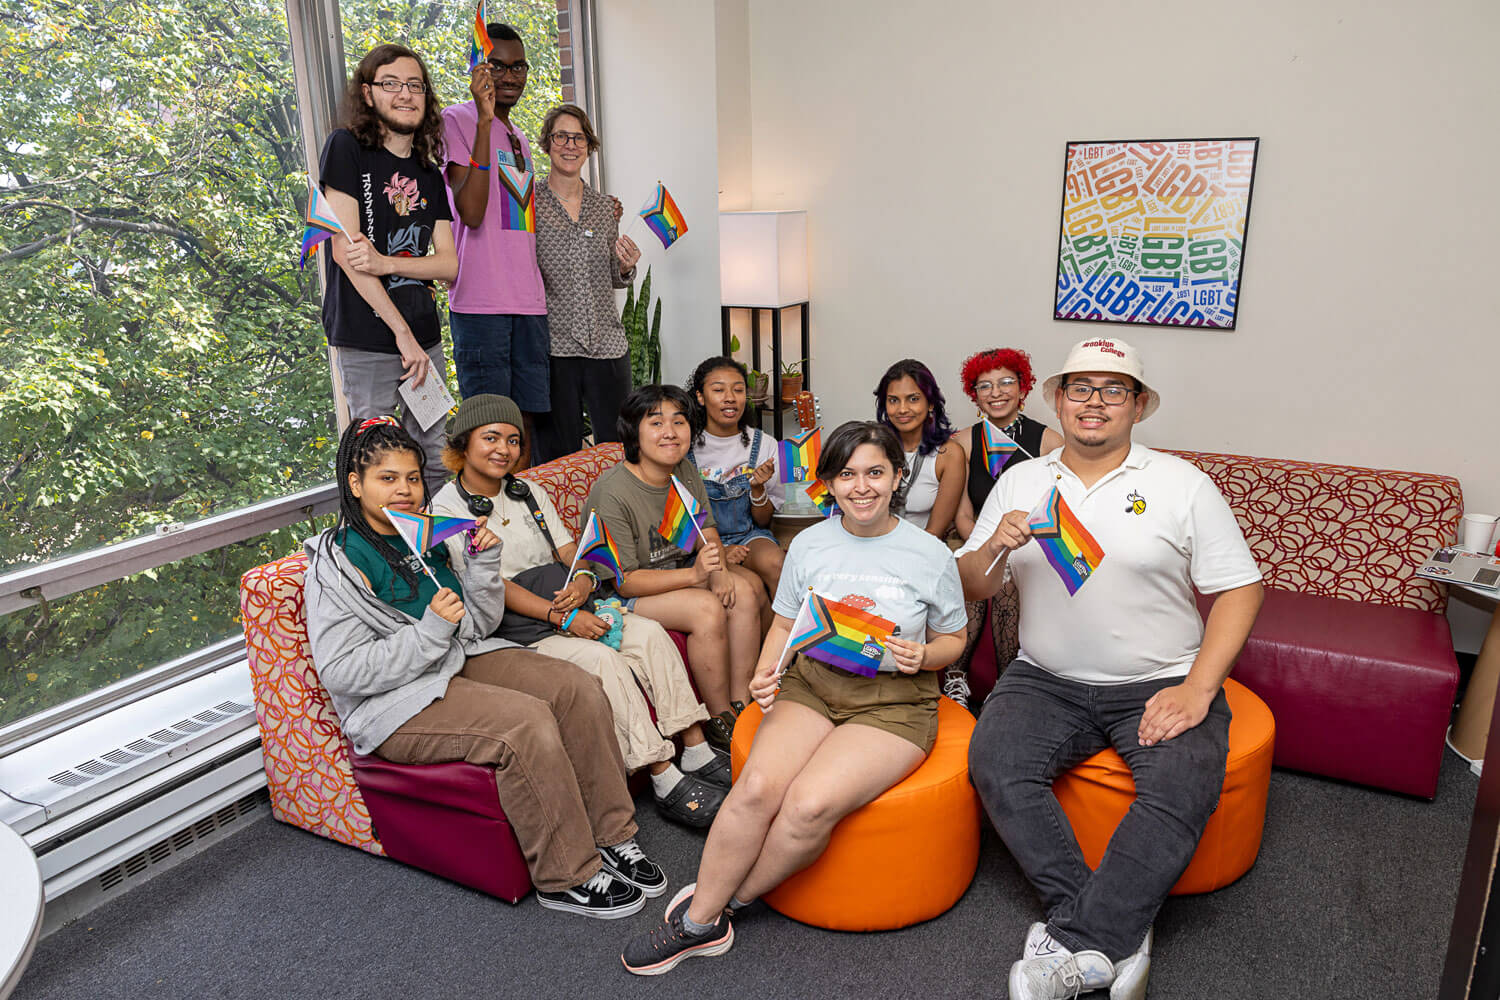 Students gather for an open house event at the LGBTQ+ Resource Center.